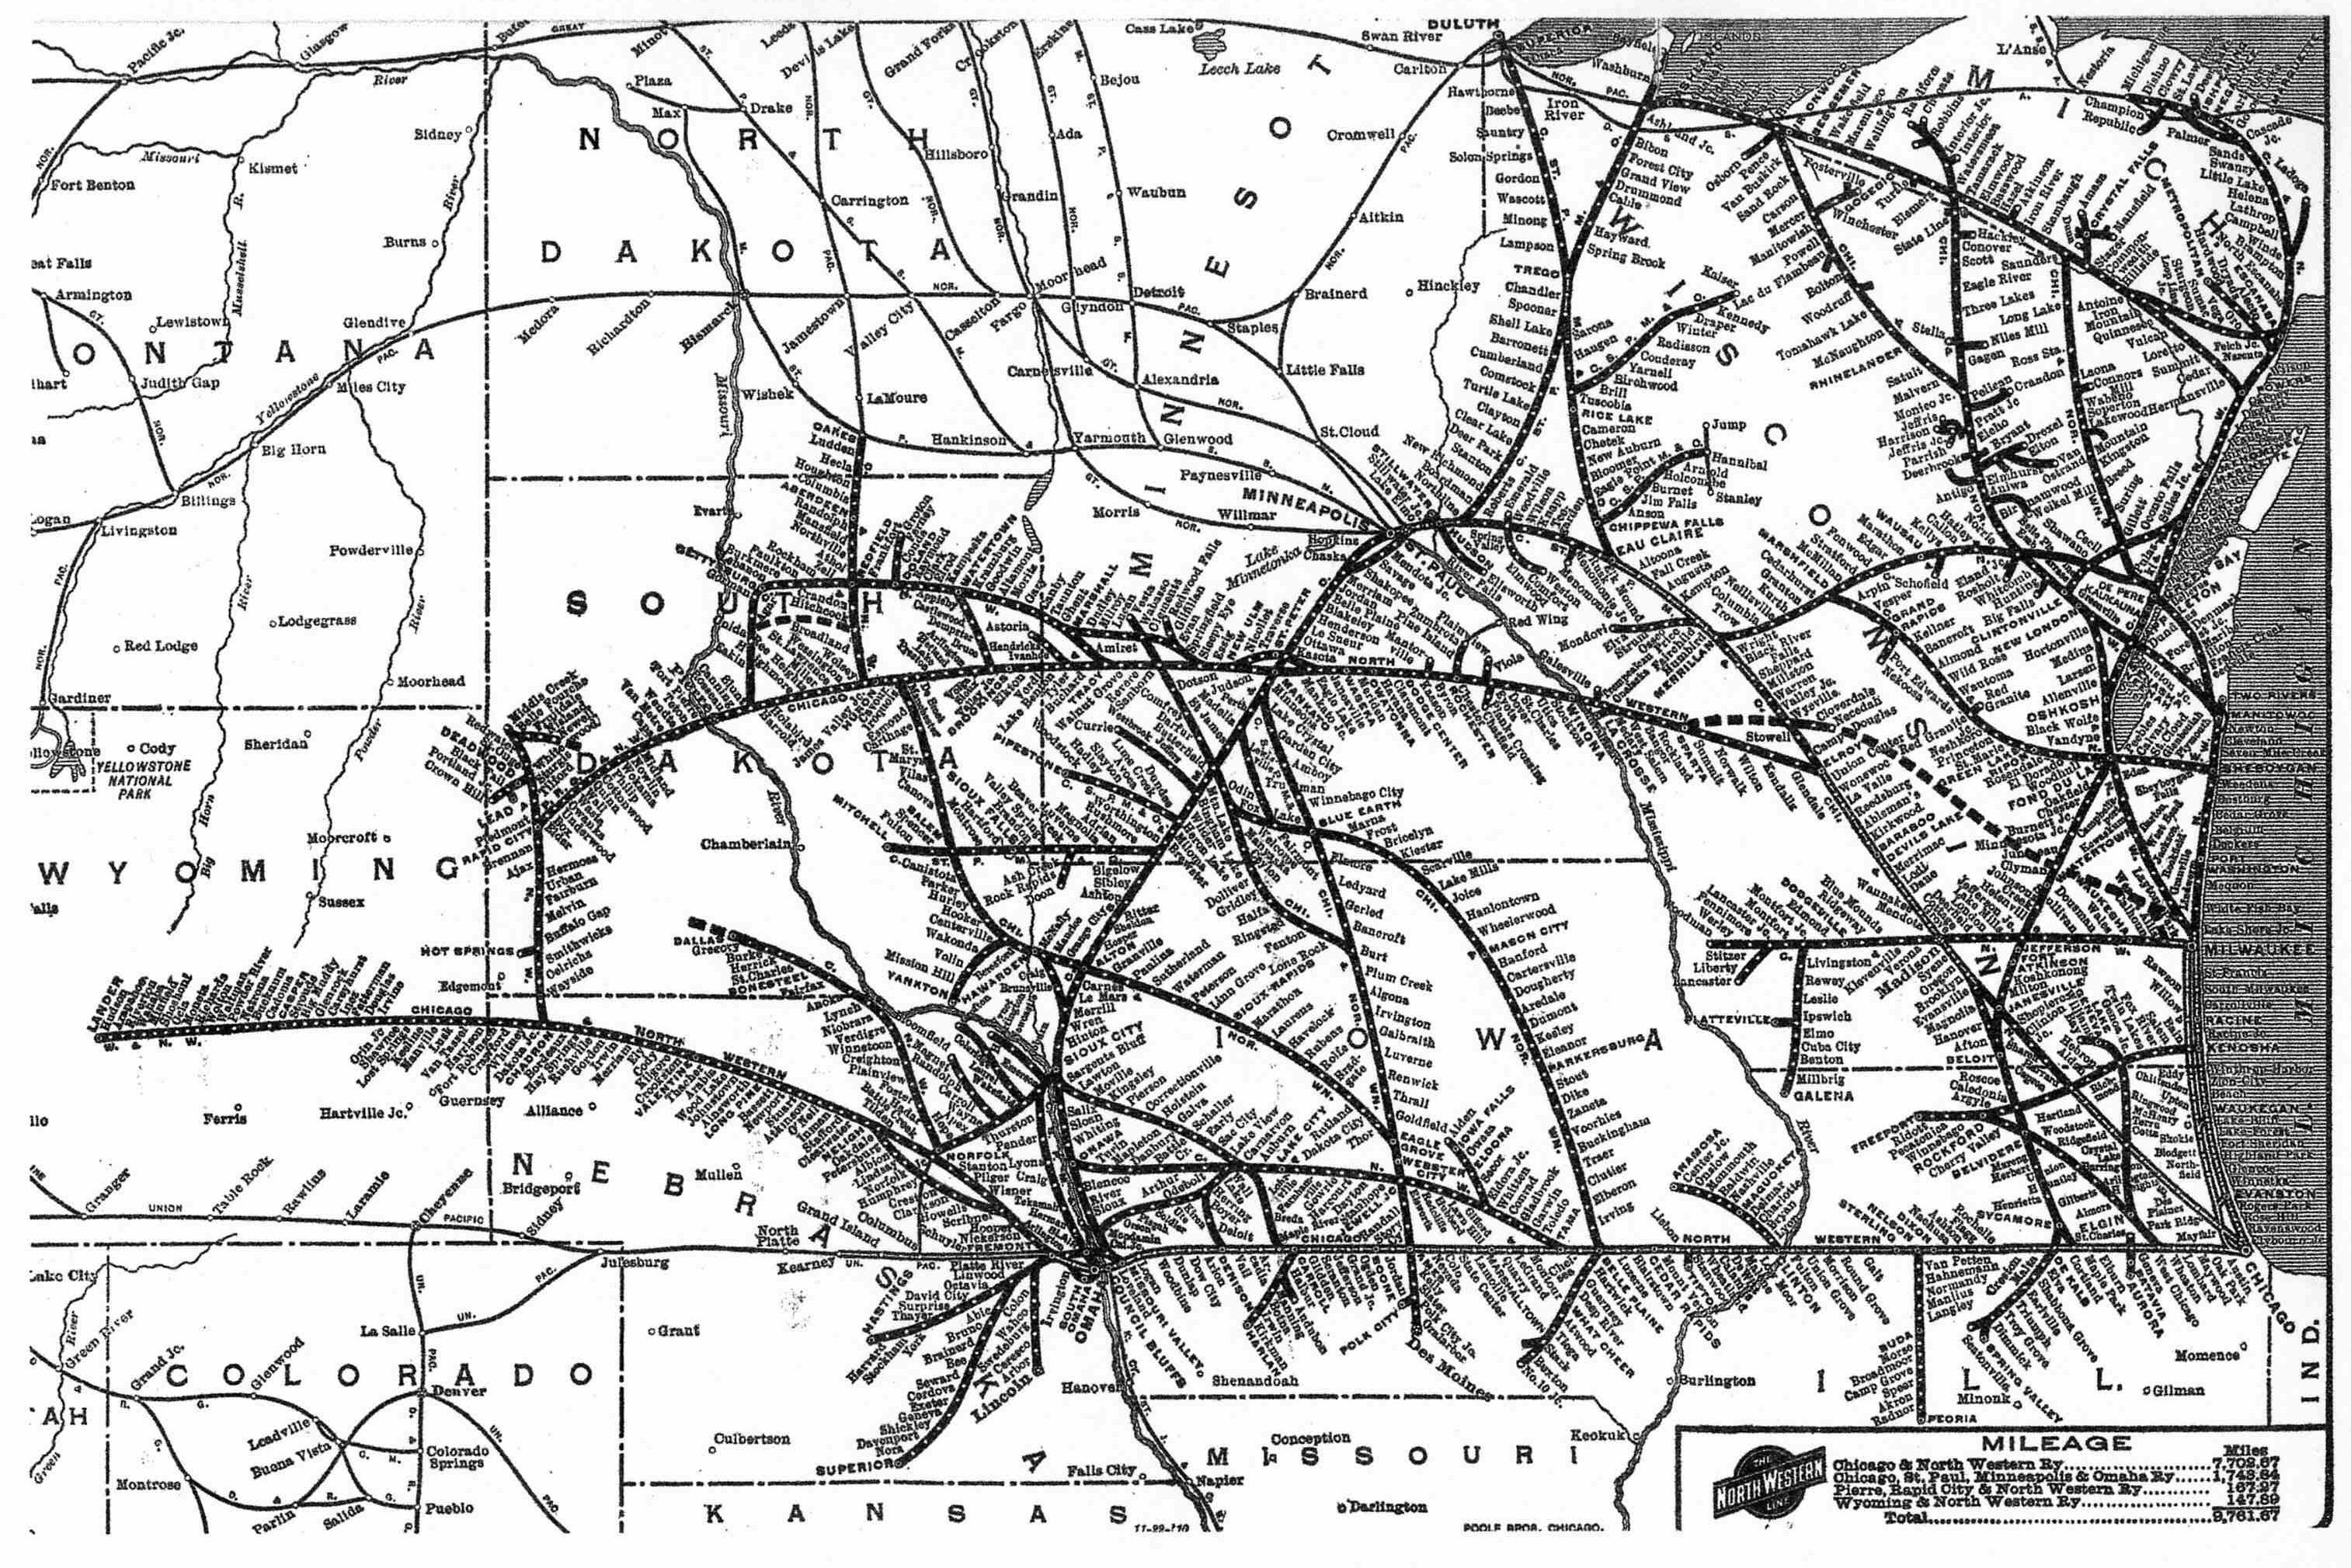 C&NW Map 1909